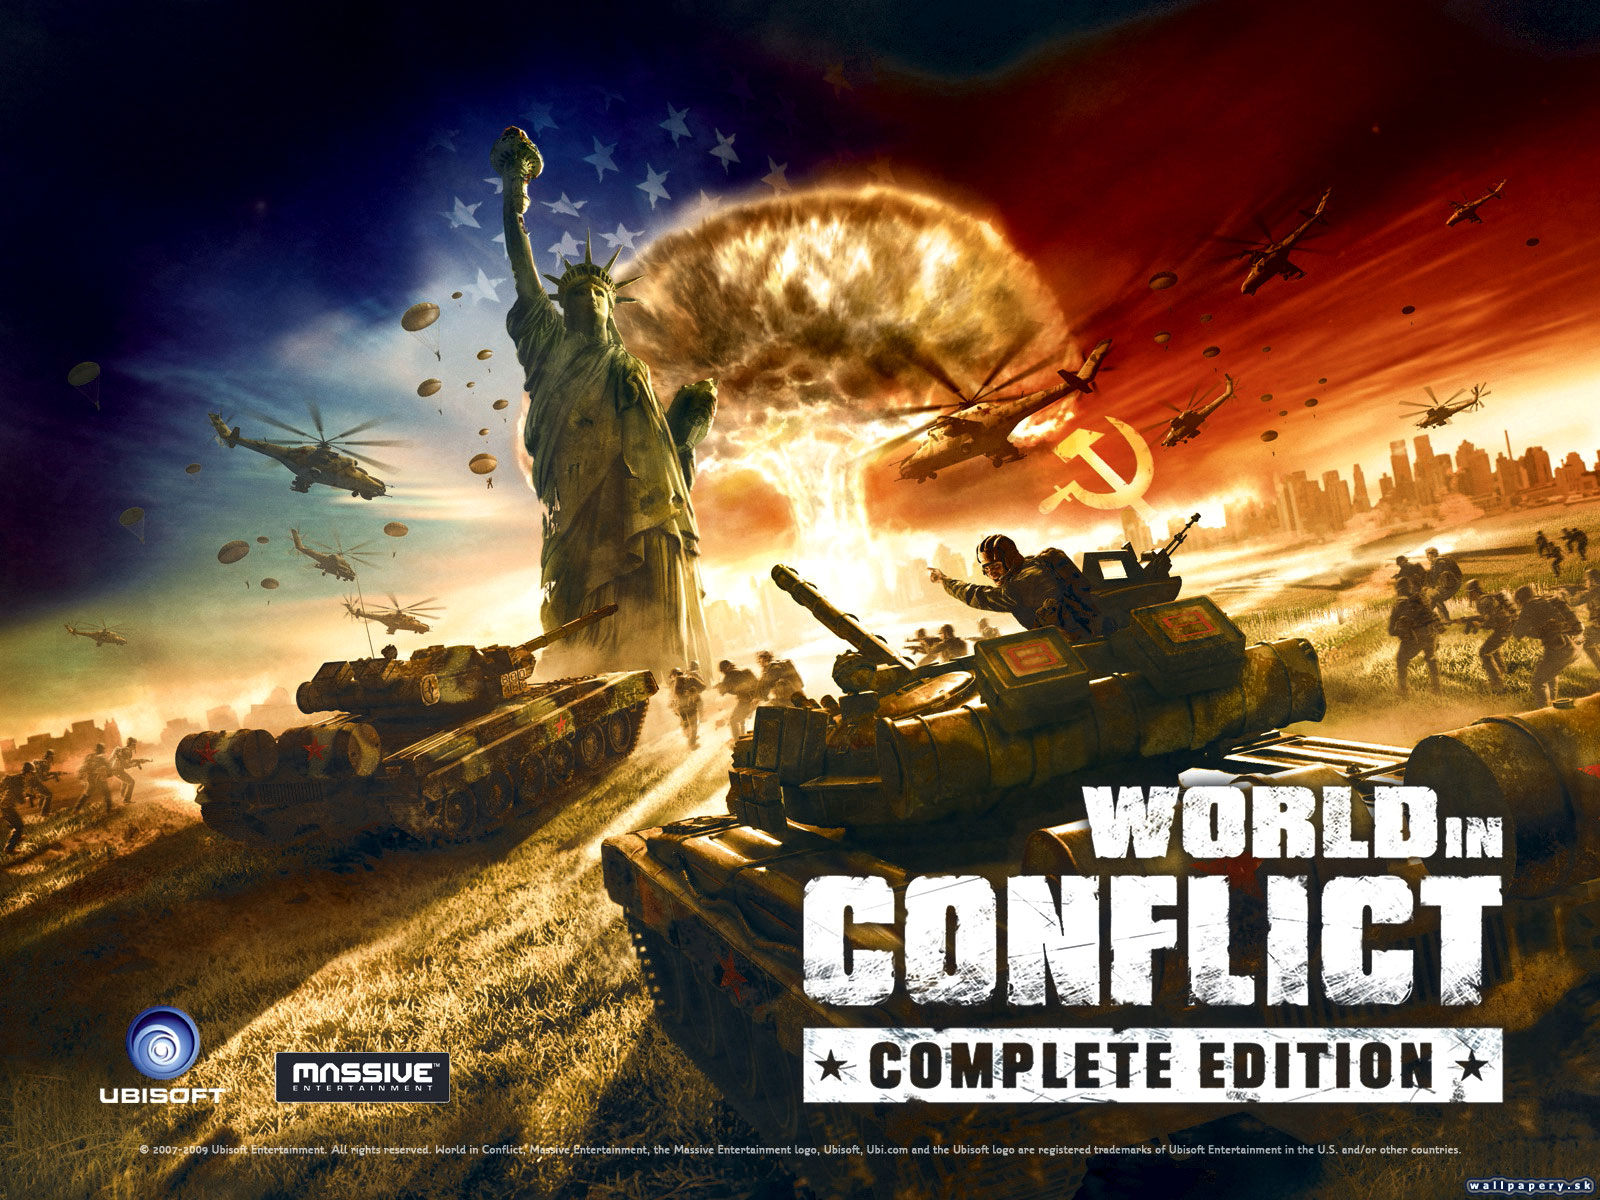 World in Conflict: Complete Edition - wallpaper 1